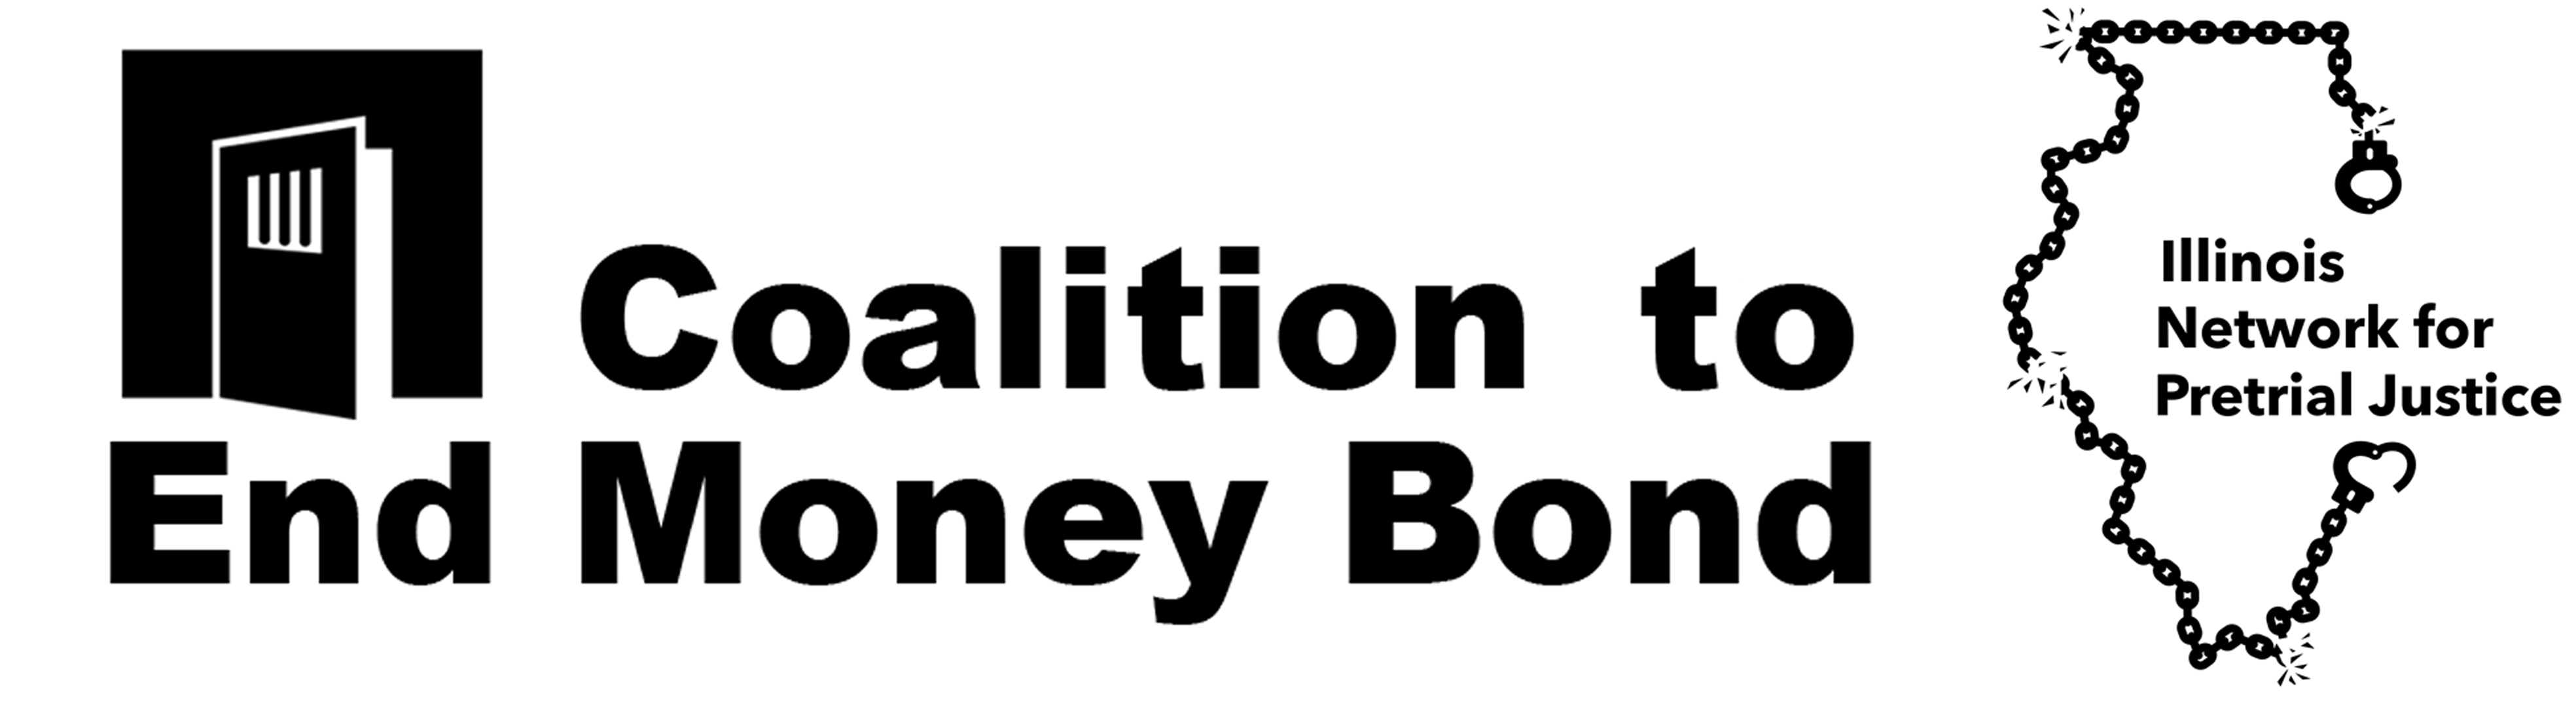 The Coalition to End Money Bond is working to end money bond in Illinois.